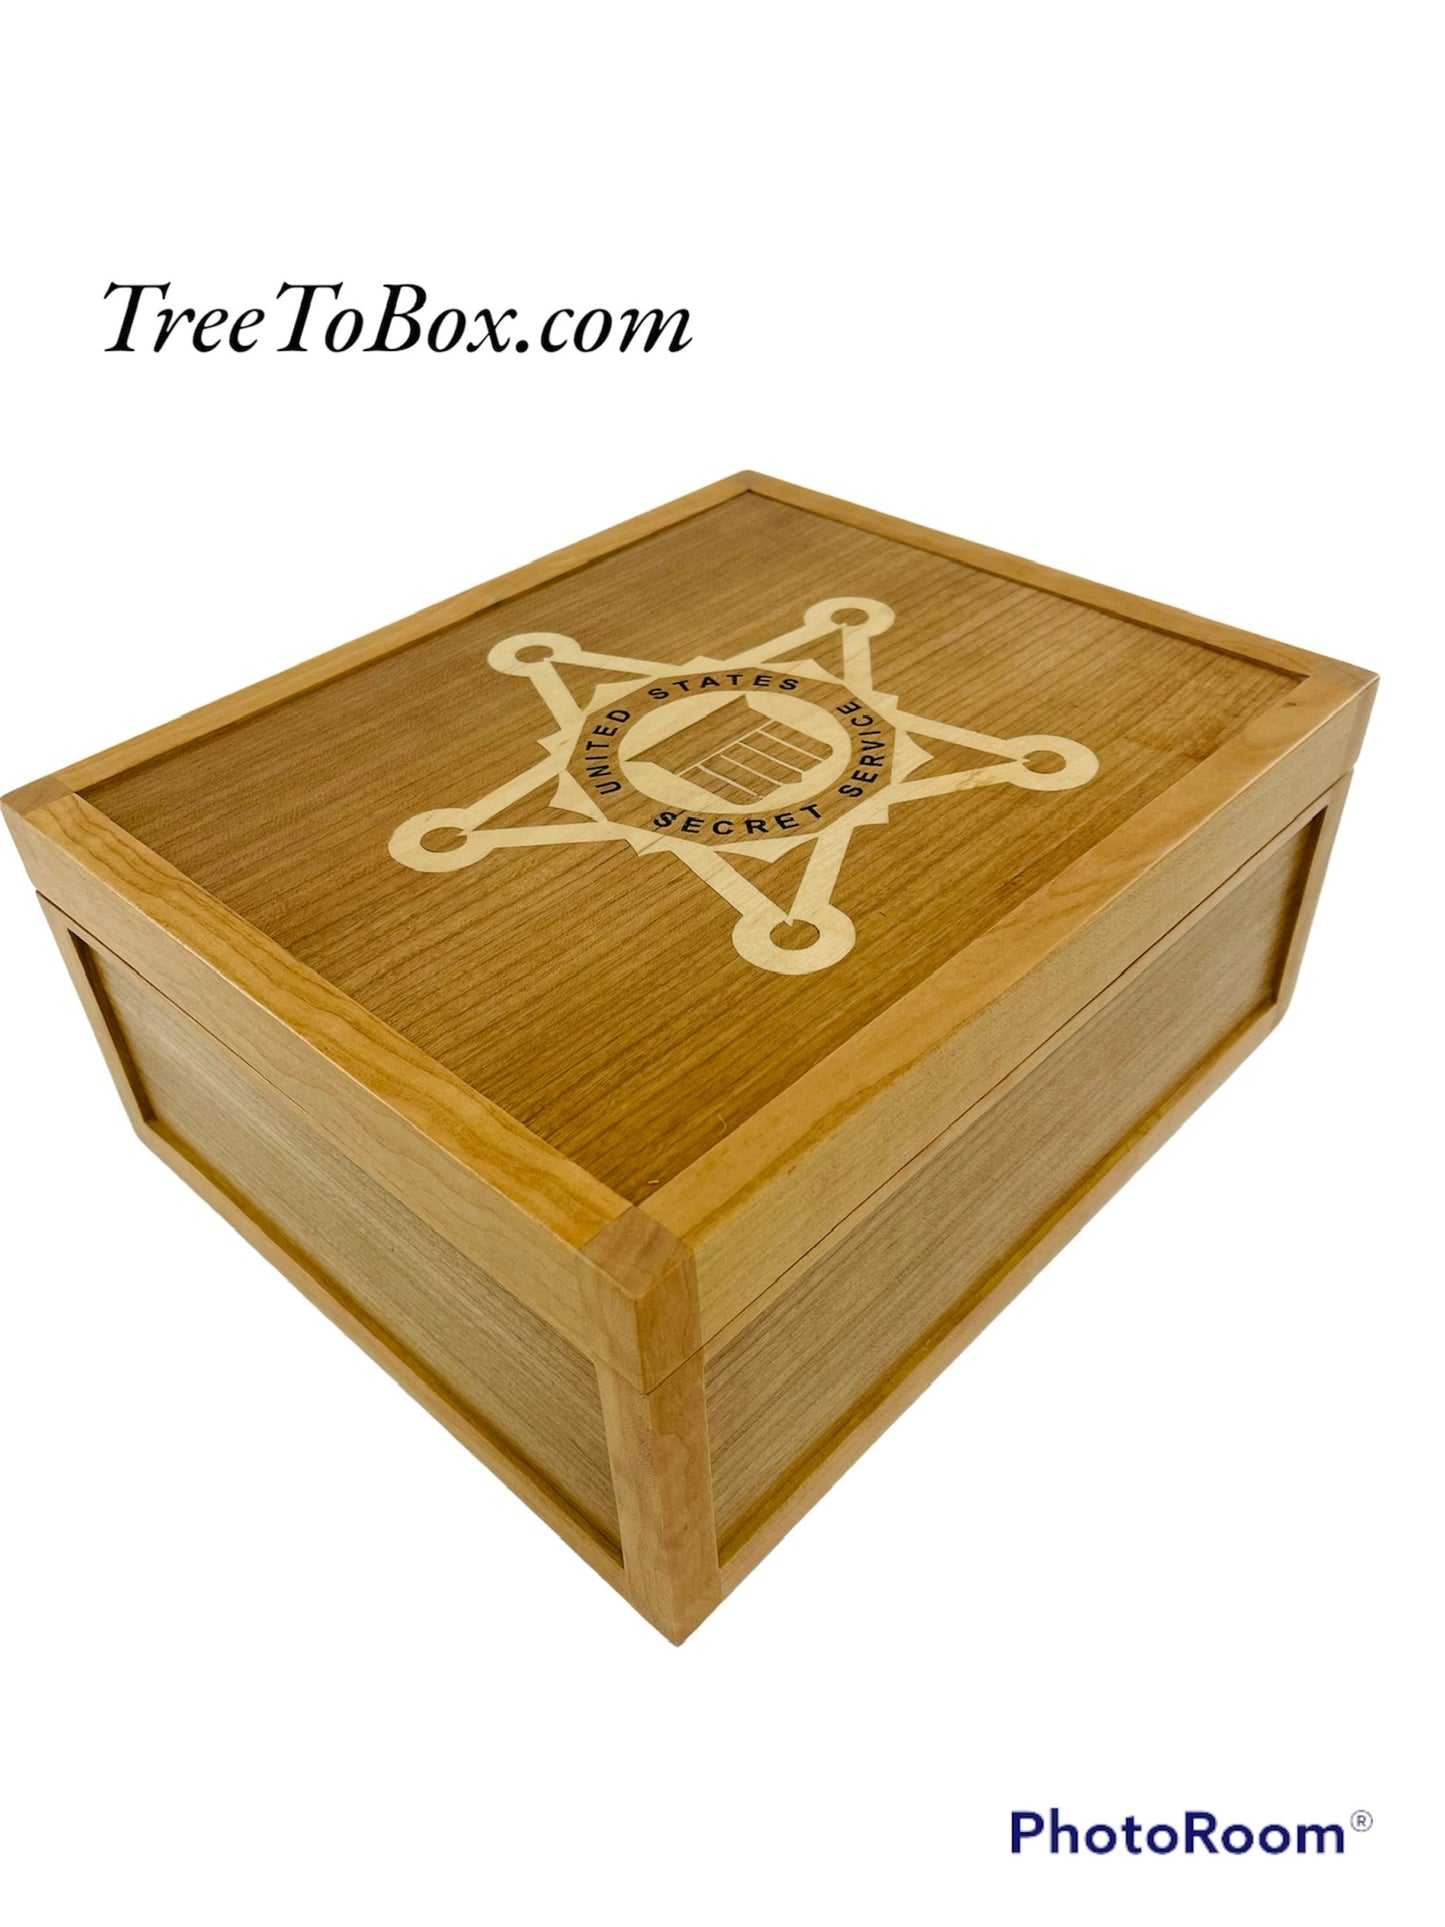 Design a Wooden Cigar box<p><h5><span style="color: #2b00ff;">(Base price shown)<p><h5>(See Ordering guide below) - TreeToBox